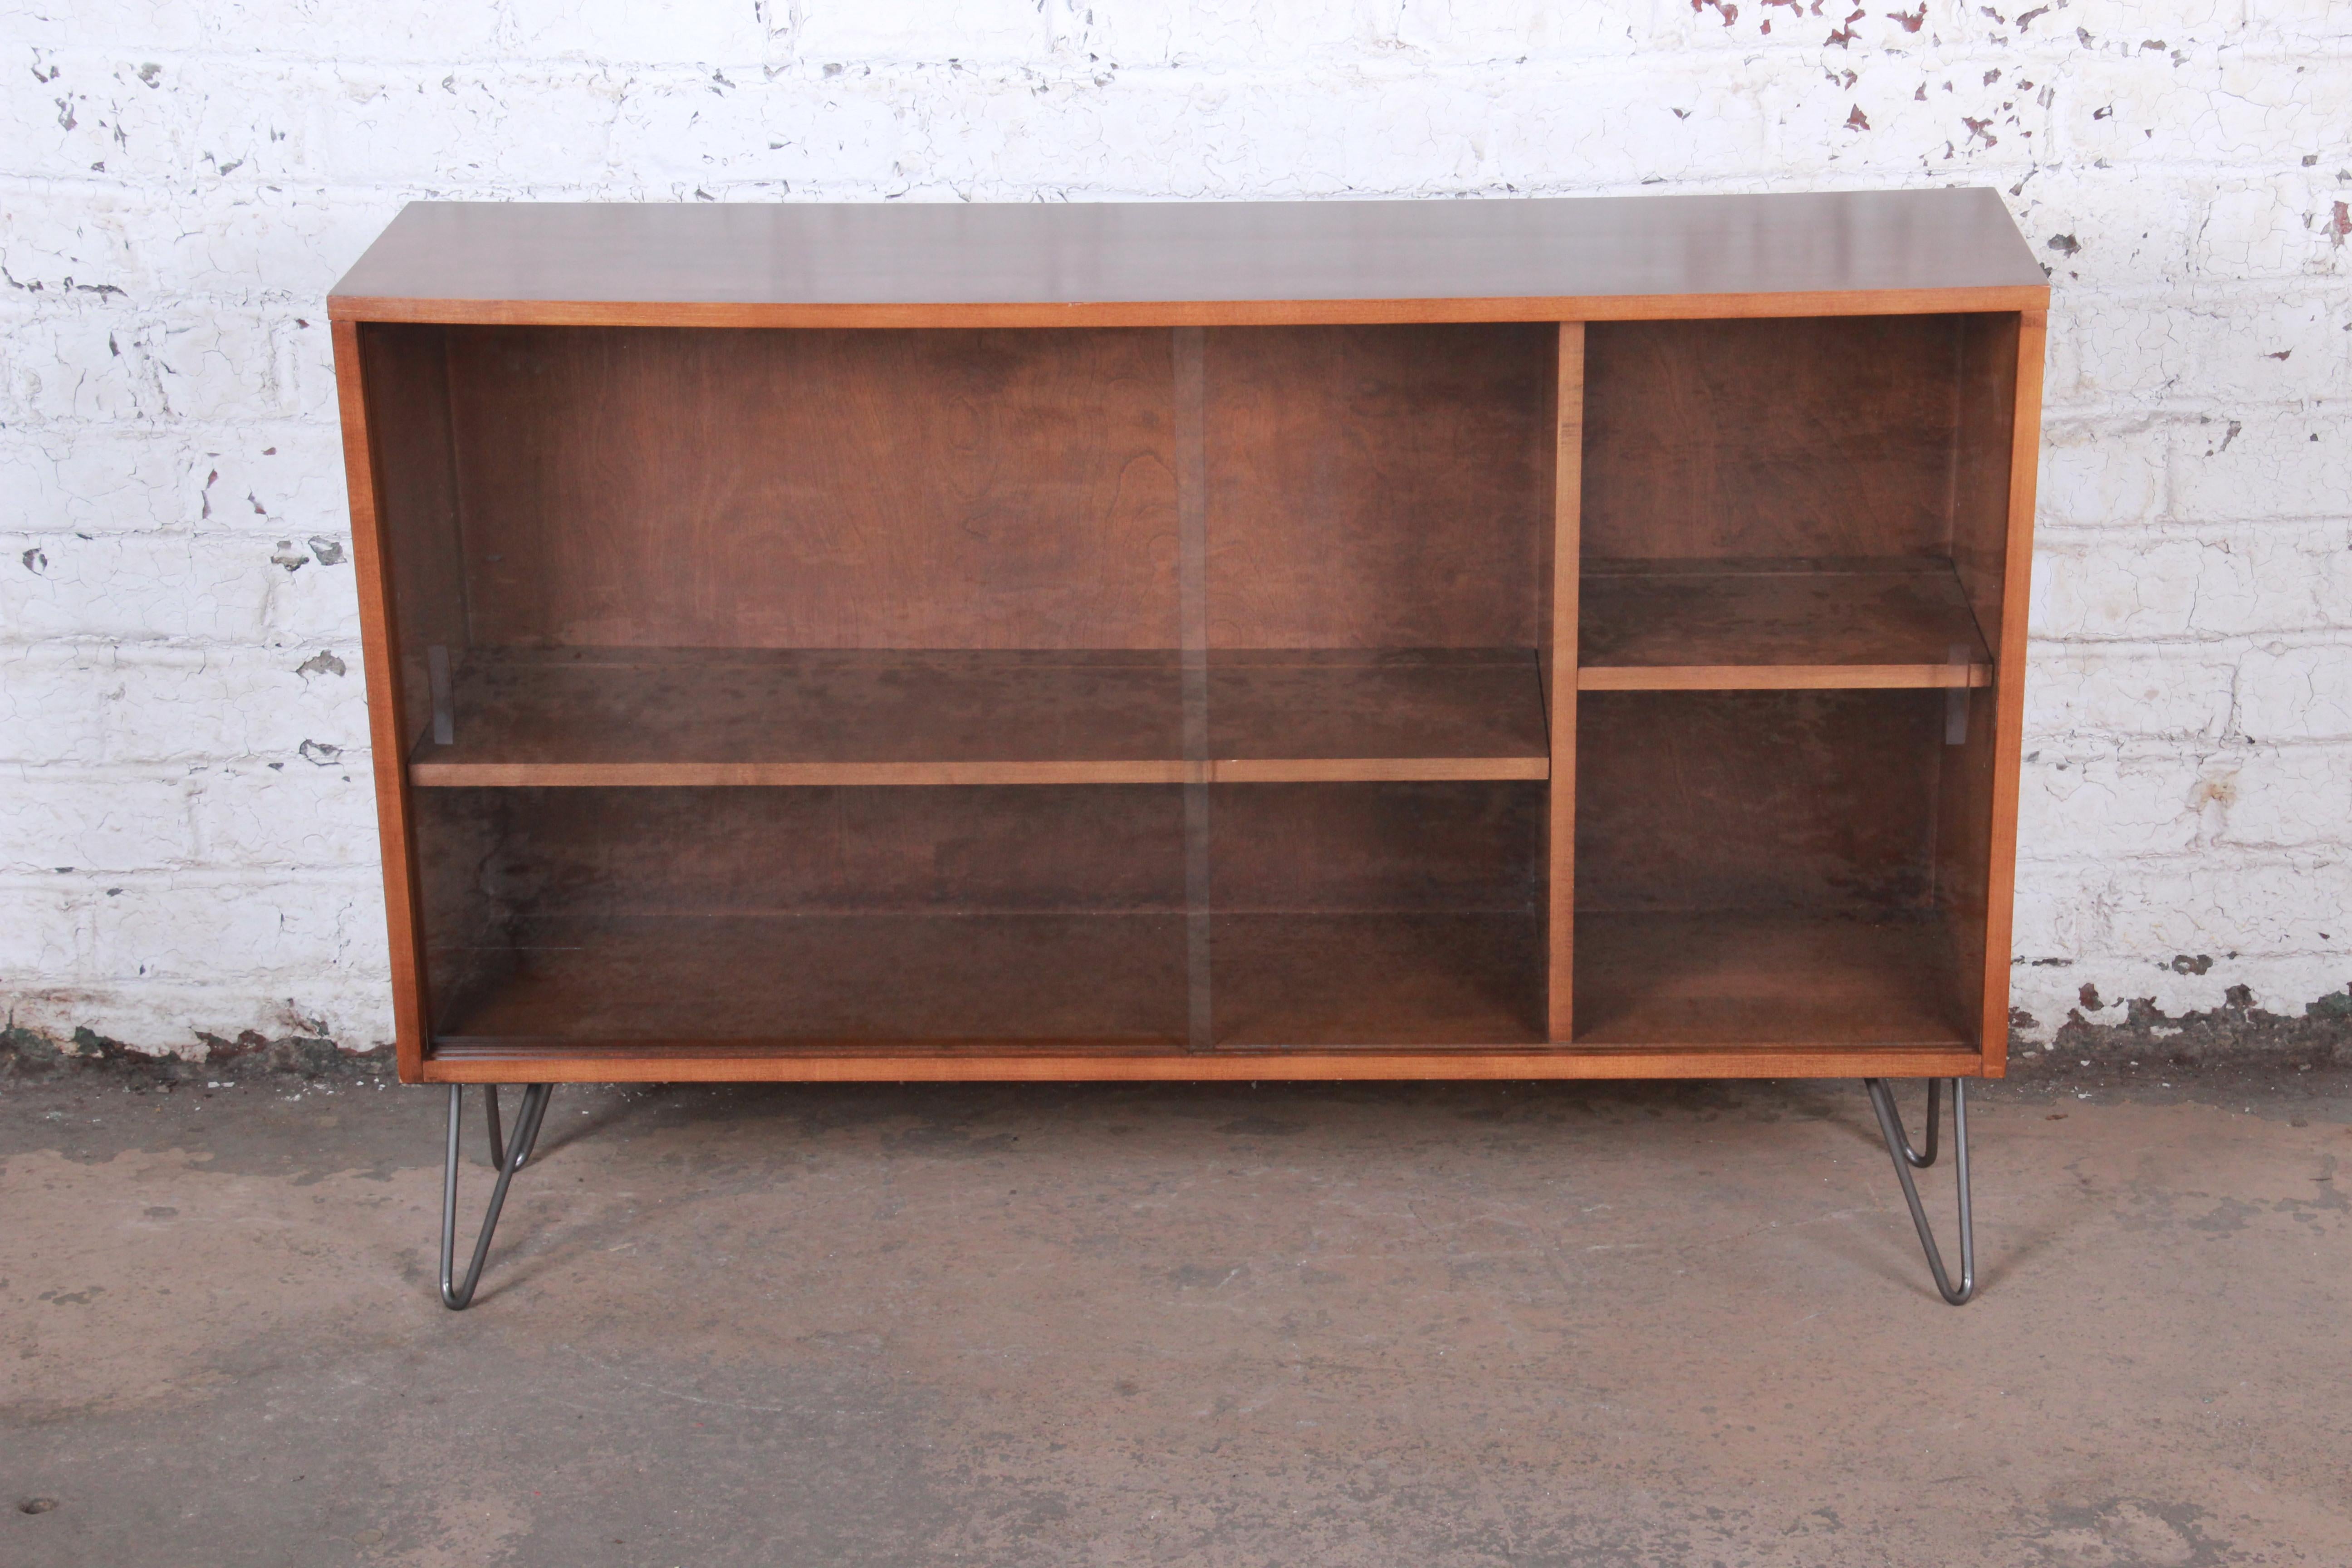 A sleek and stylish Mid-Century Modern glass front credenza or bookcase

Designed by Paul McCobb for Winchendon Furniture 